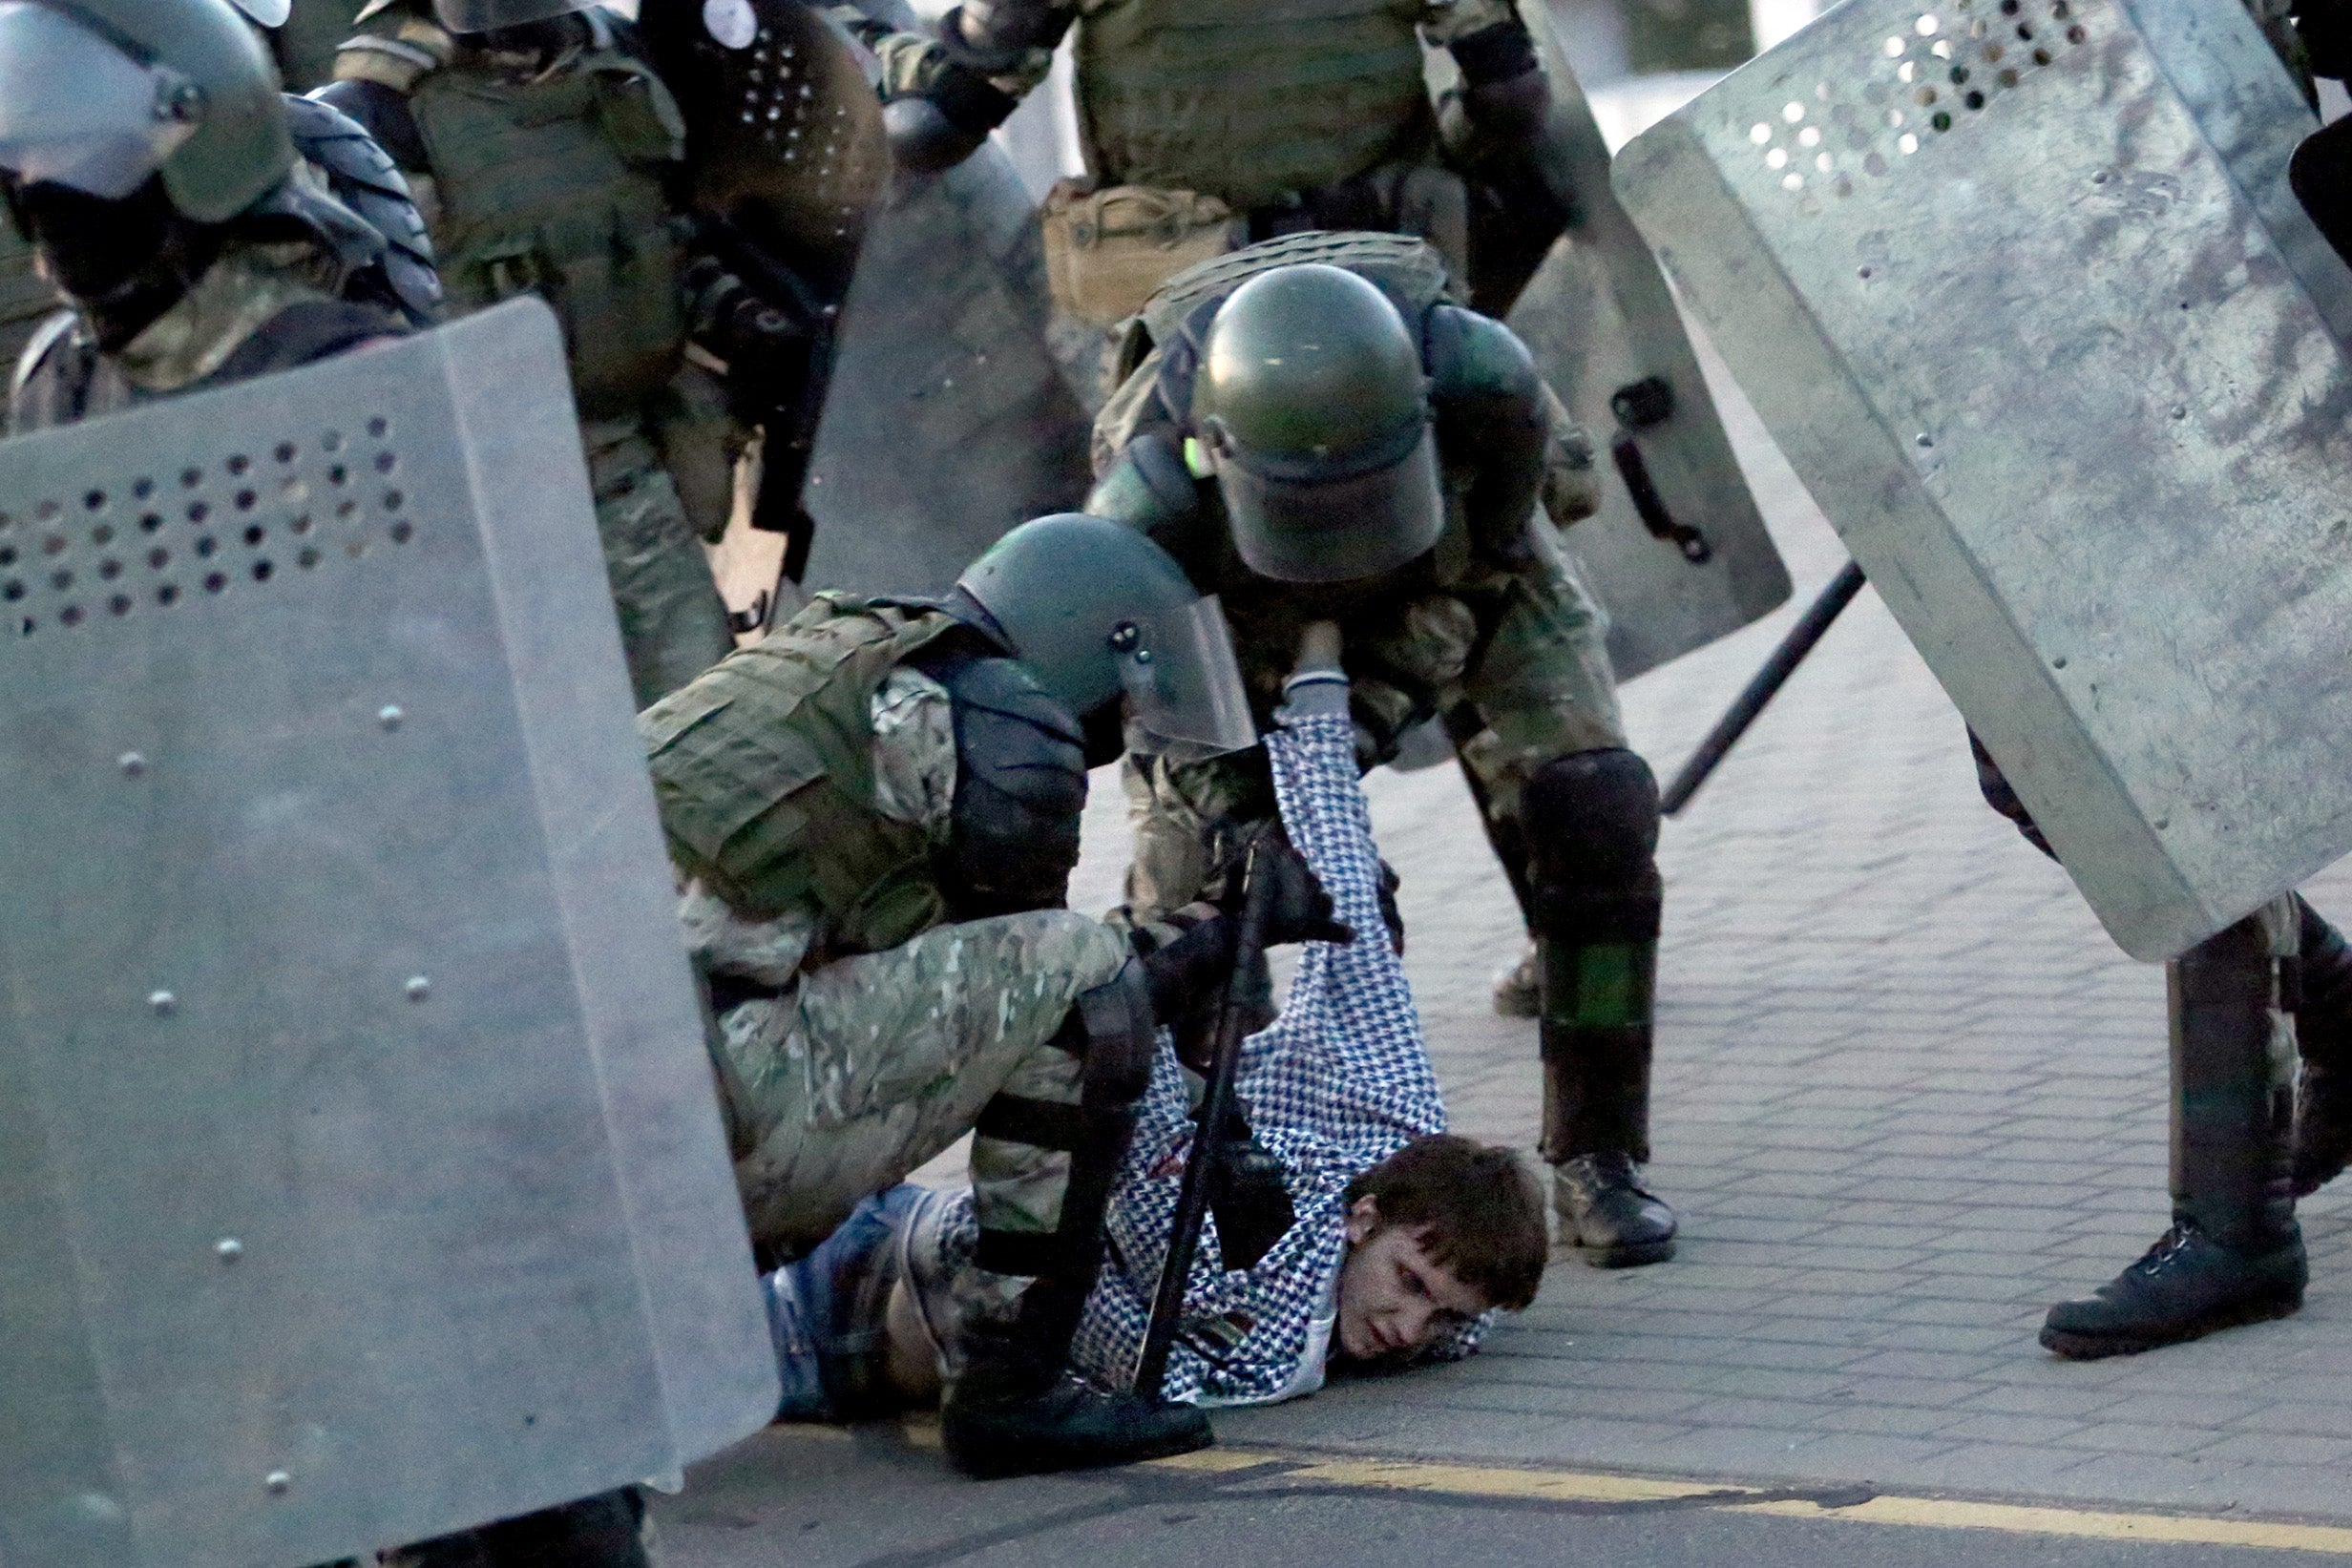 Police detain a man during an opposition rally in Minsk